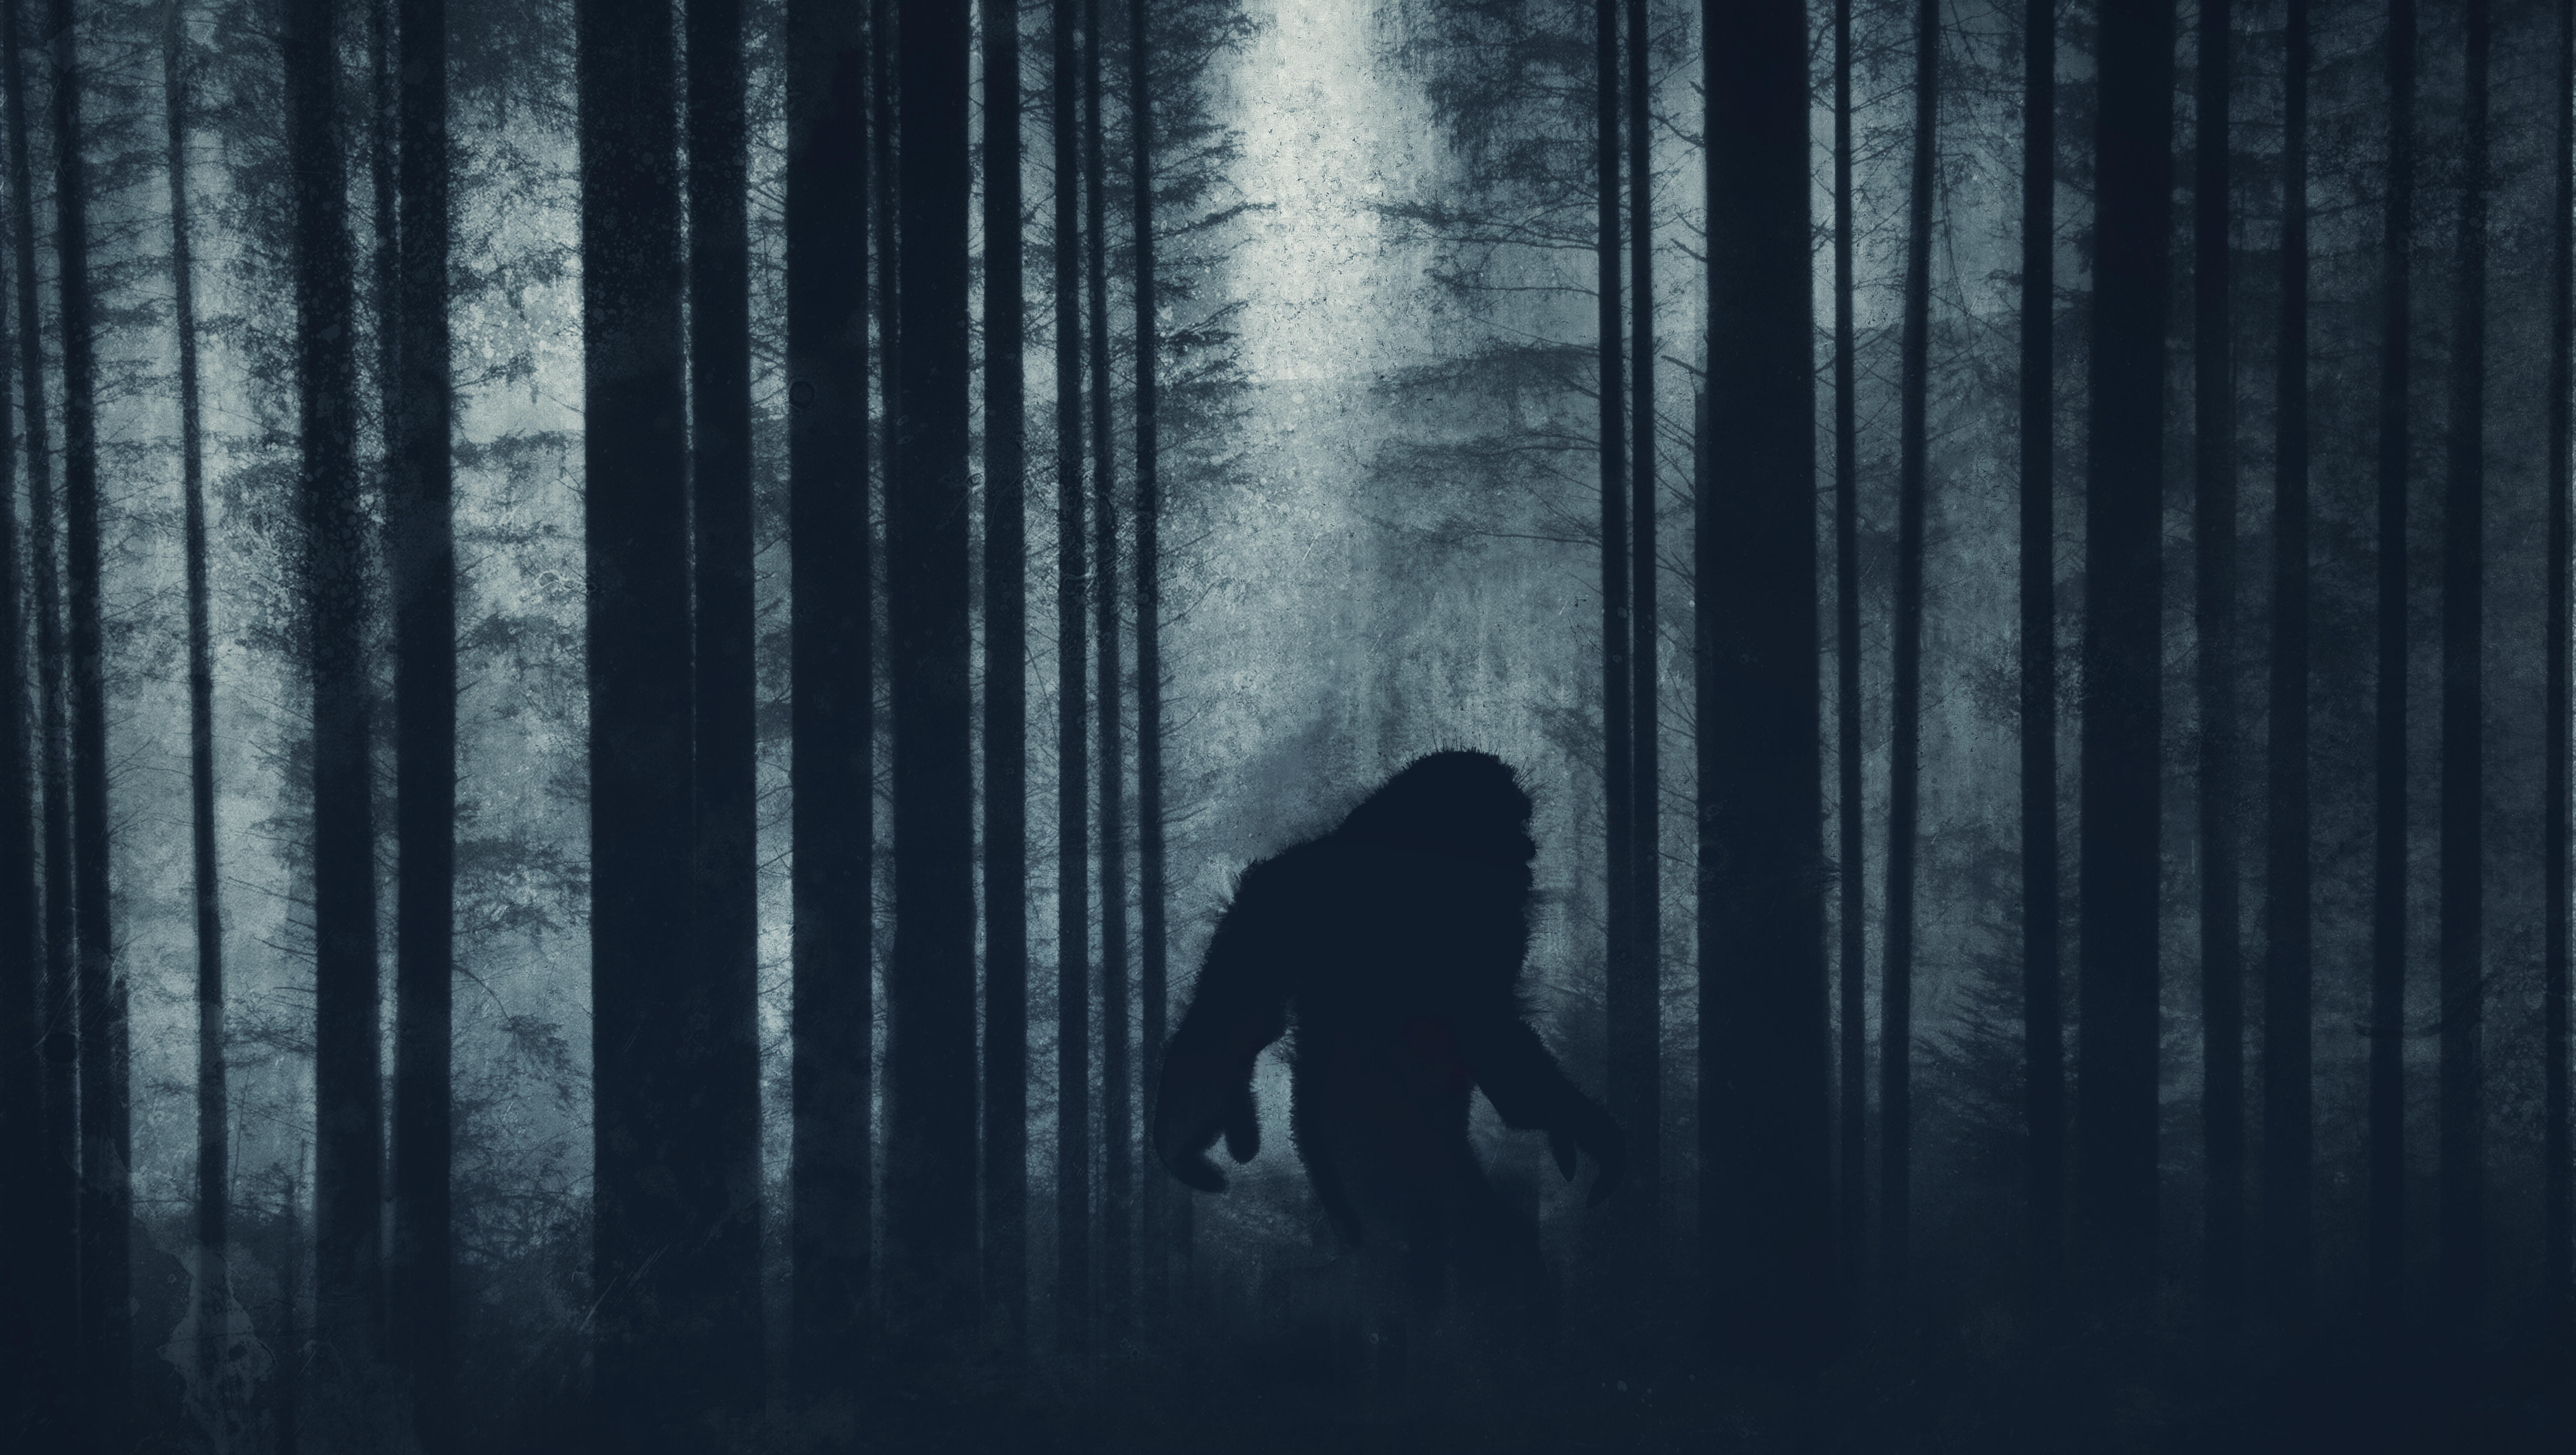 WATCH Is This Footage Of Bigfoot Taking A Dump?